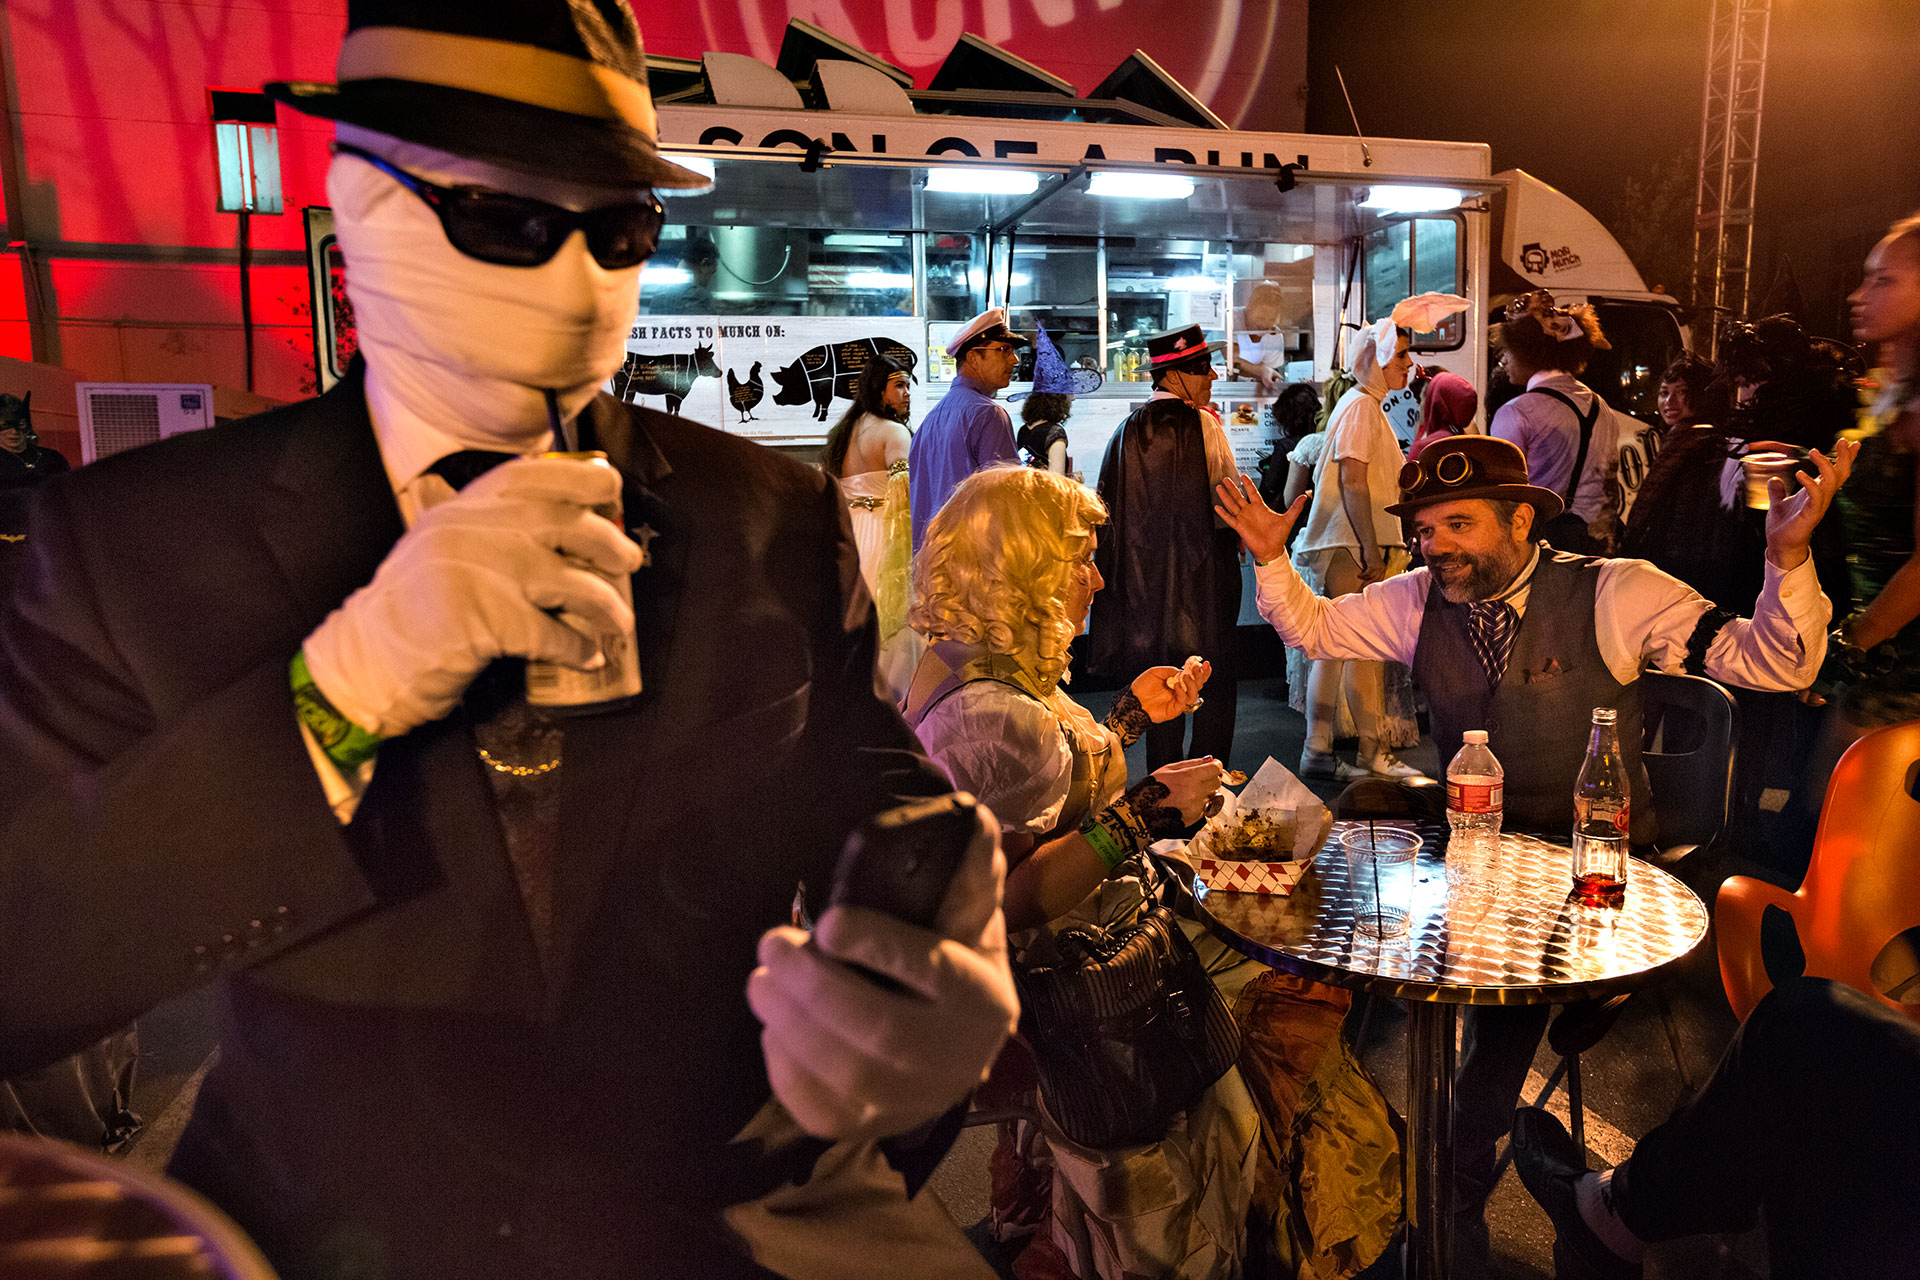  Halloween partiers enjoy freshly made meals from food trucks at public radio KCRW’s annual masquerade ball. The fundraiser features several bands and is held on the grounds of the LA Park Plaza hotel. Special events guarantee customers – and cash – 